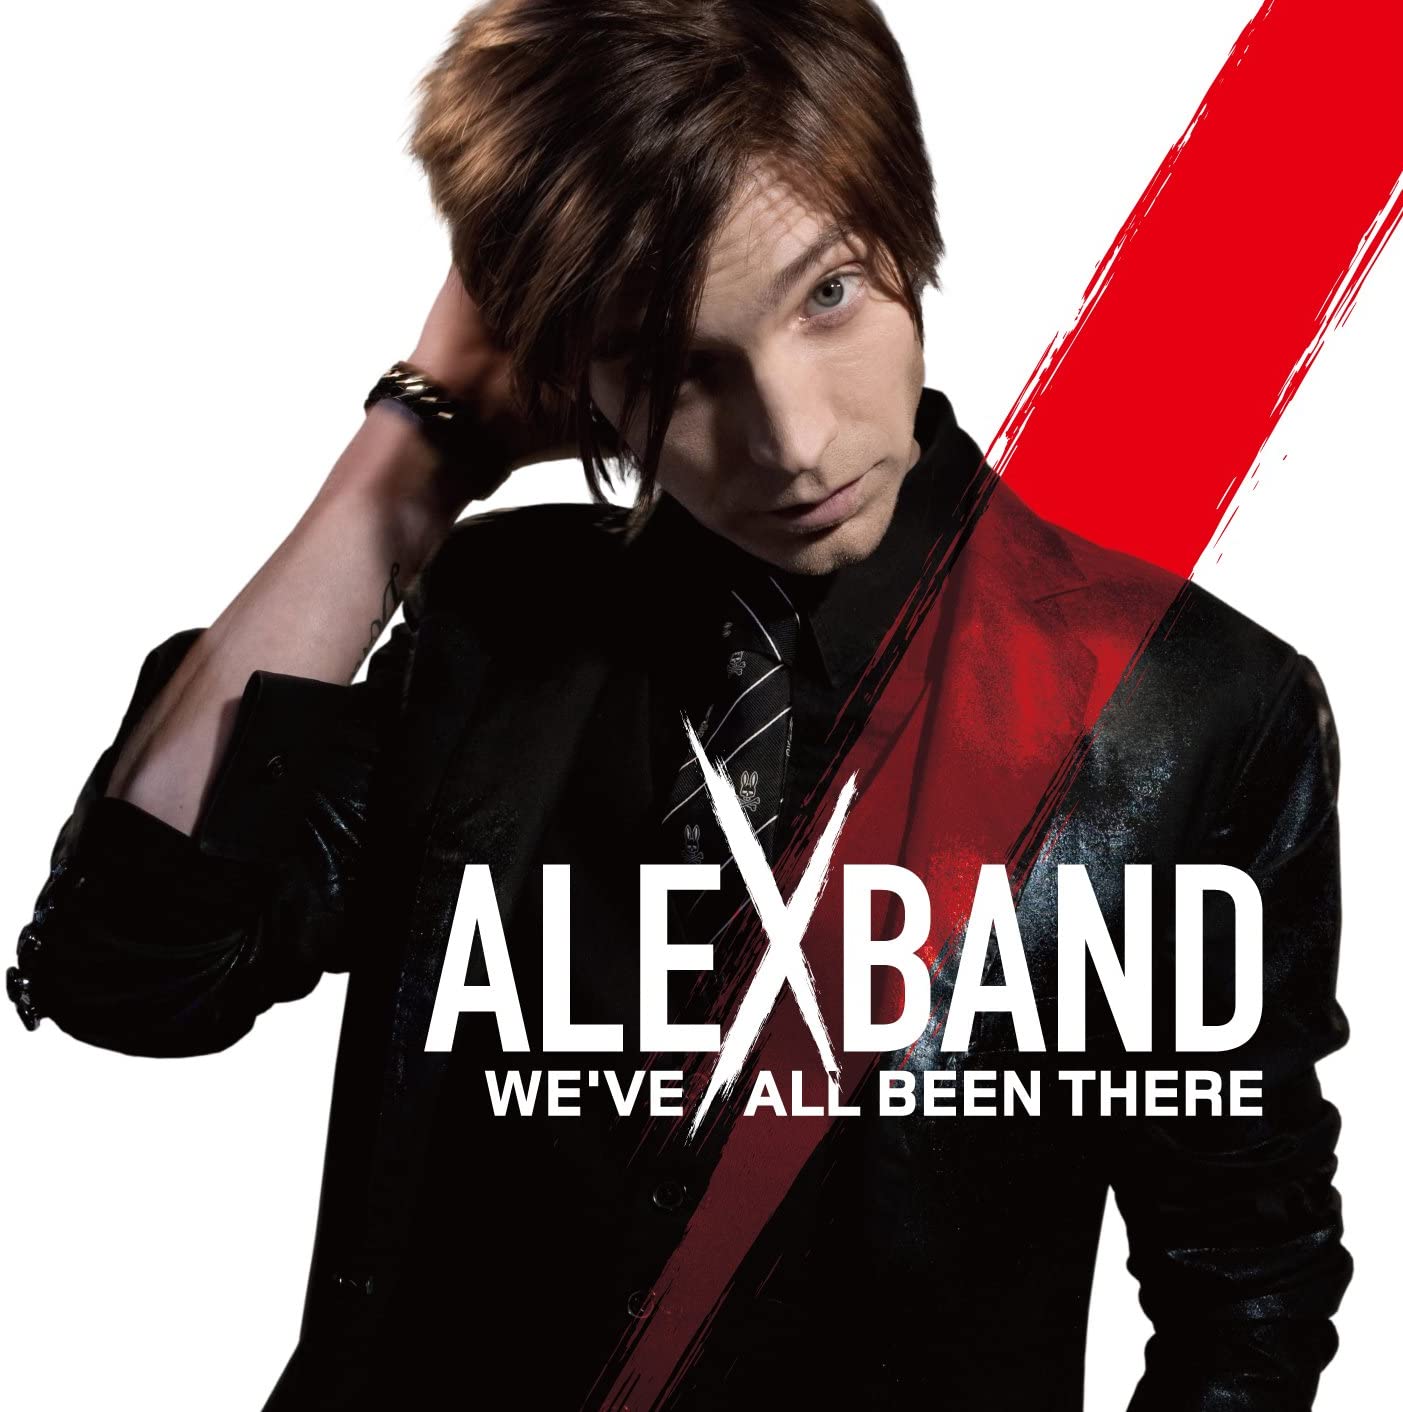 Alexband_album_We've_all_been_there